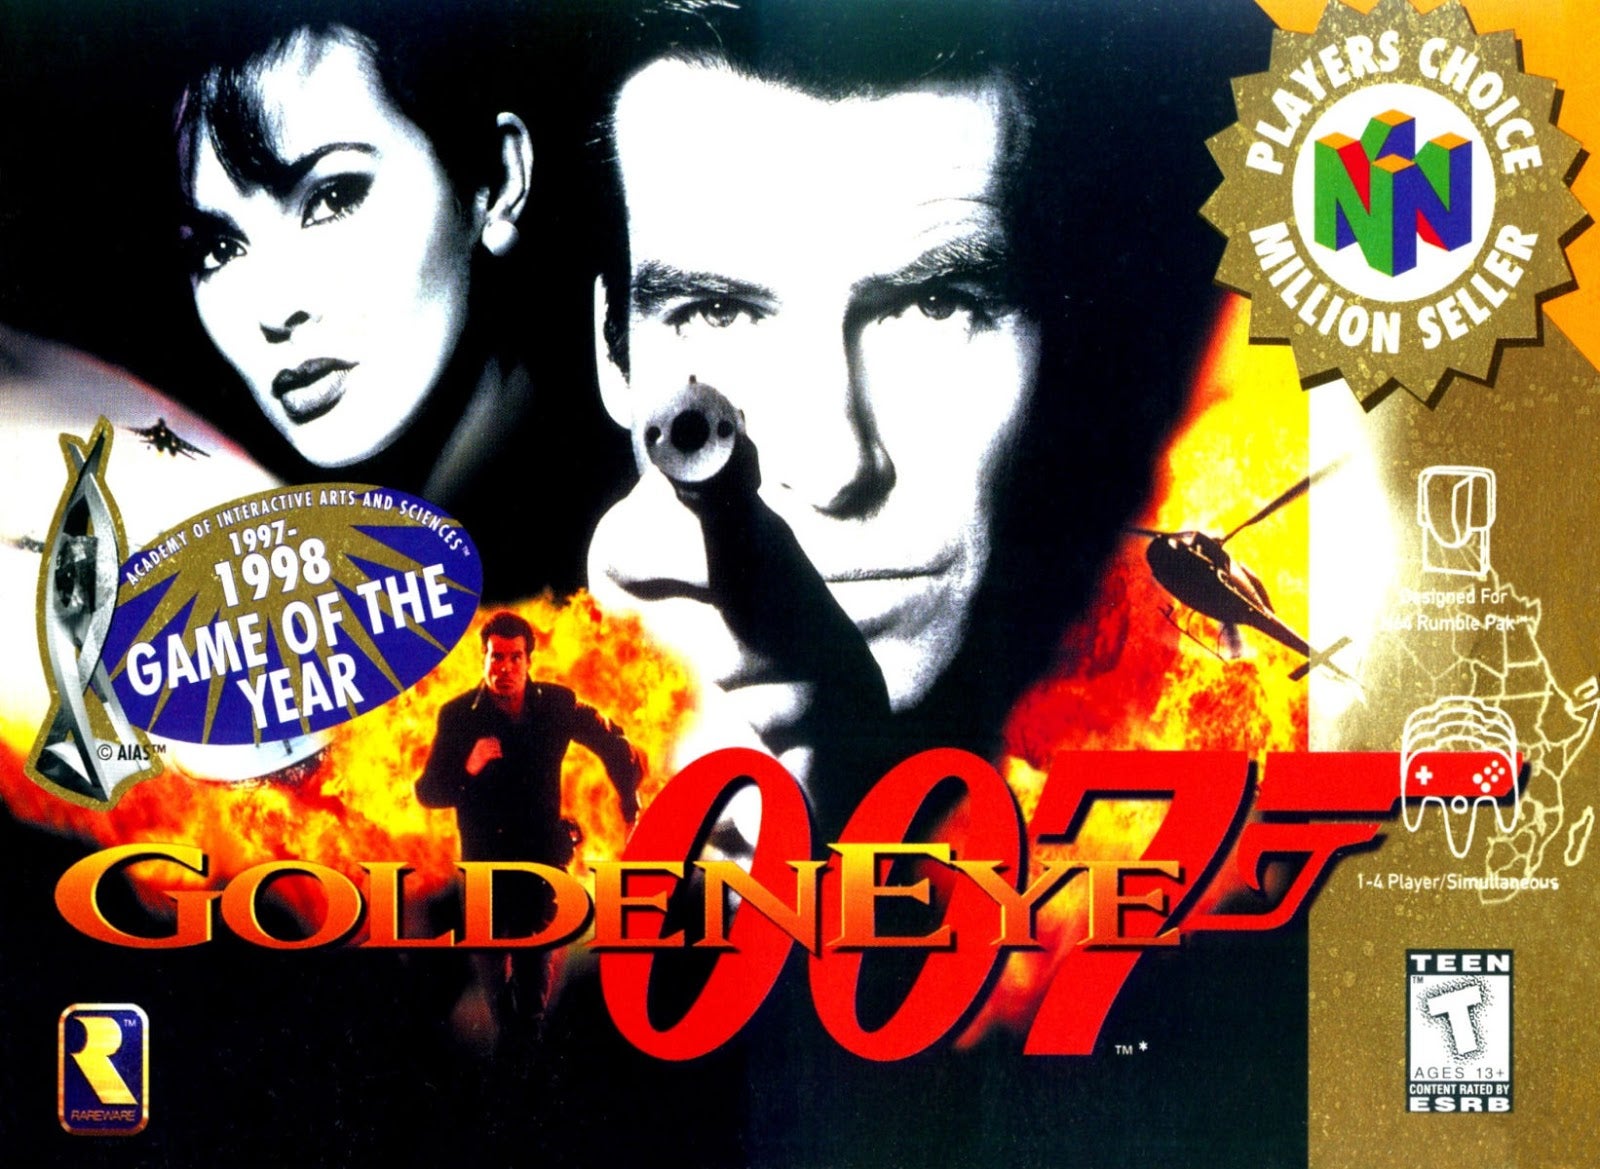 Image for Goldeneye 007 Xbox Achievements appear on website, hinting at new port